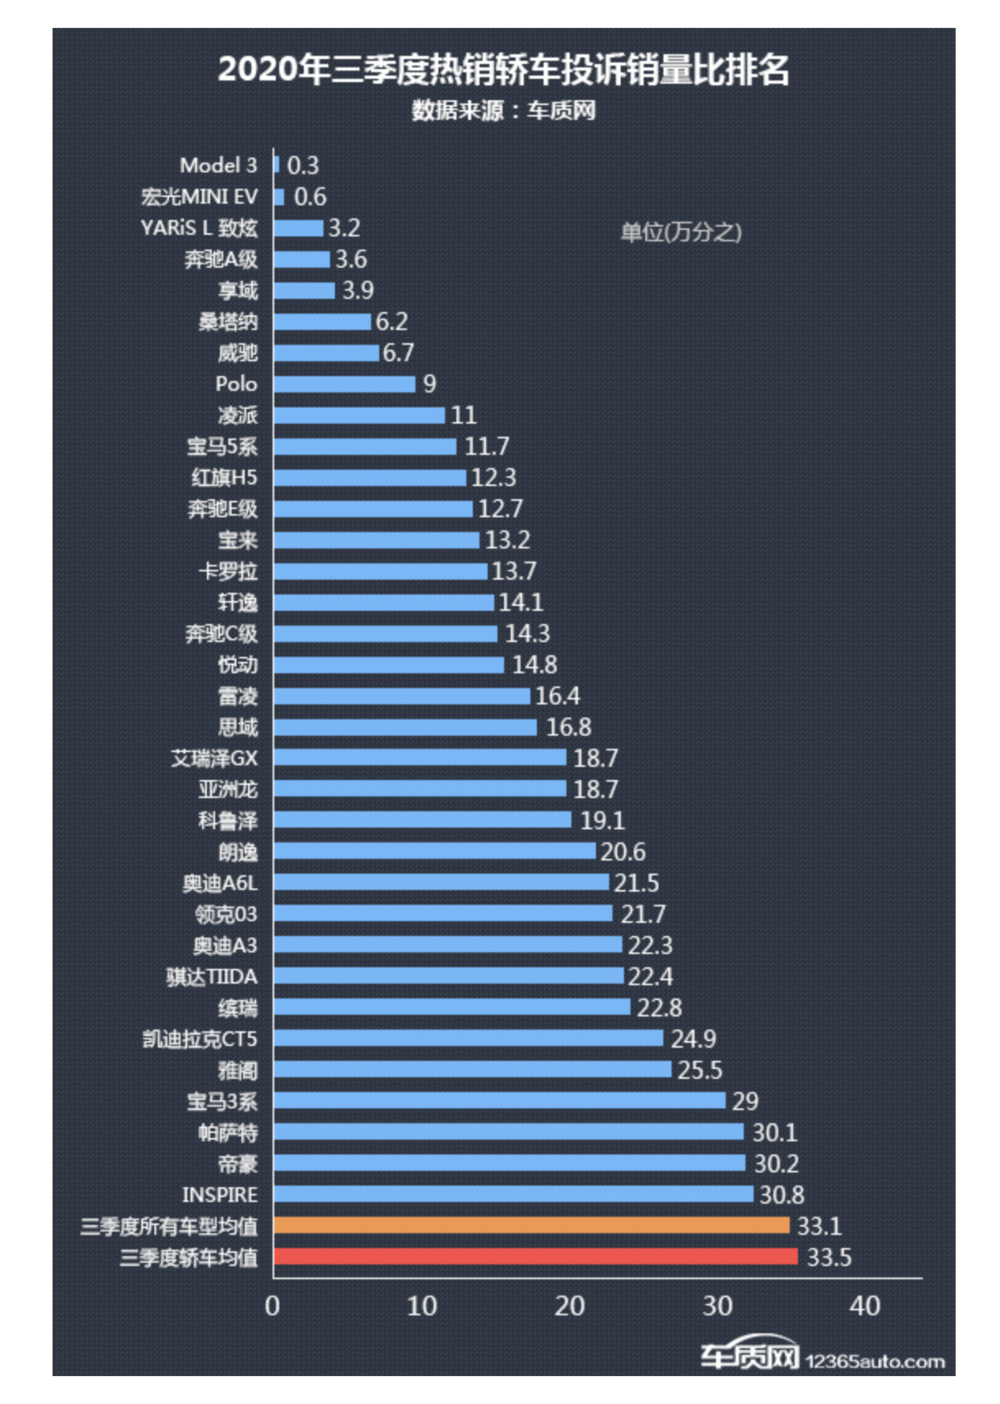 The complaint to sales ratio of all the best selling passenger cars in China in the third quarter of 2020. Source: China’s Passenger Car Association.